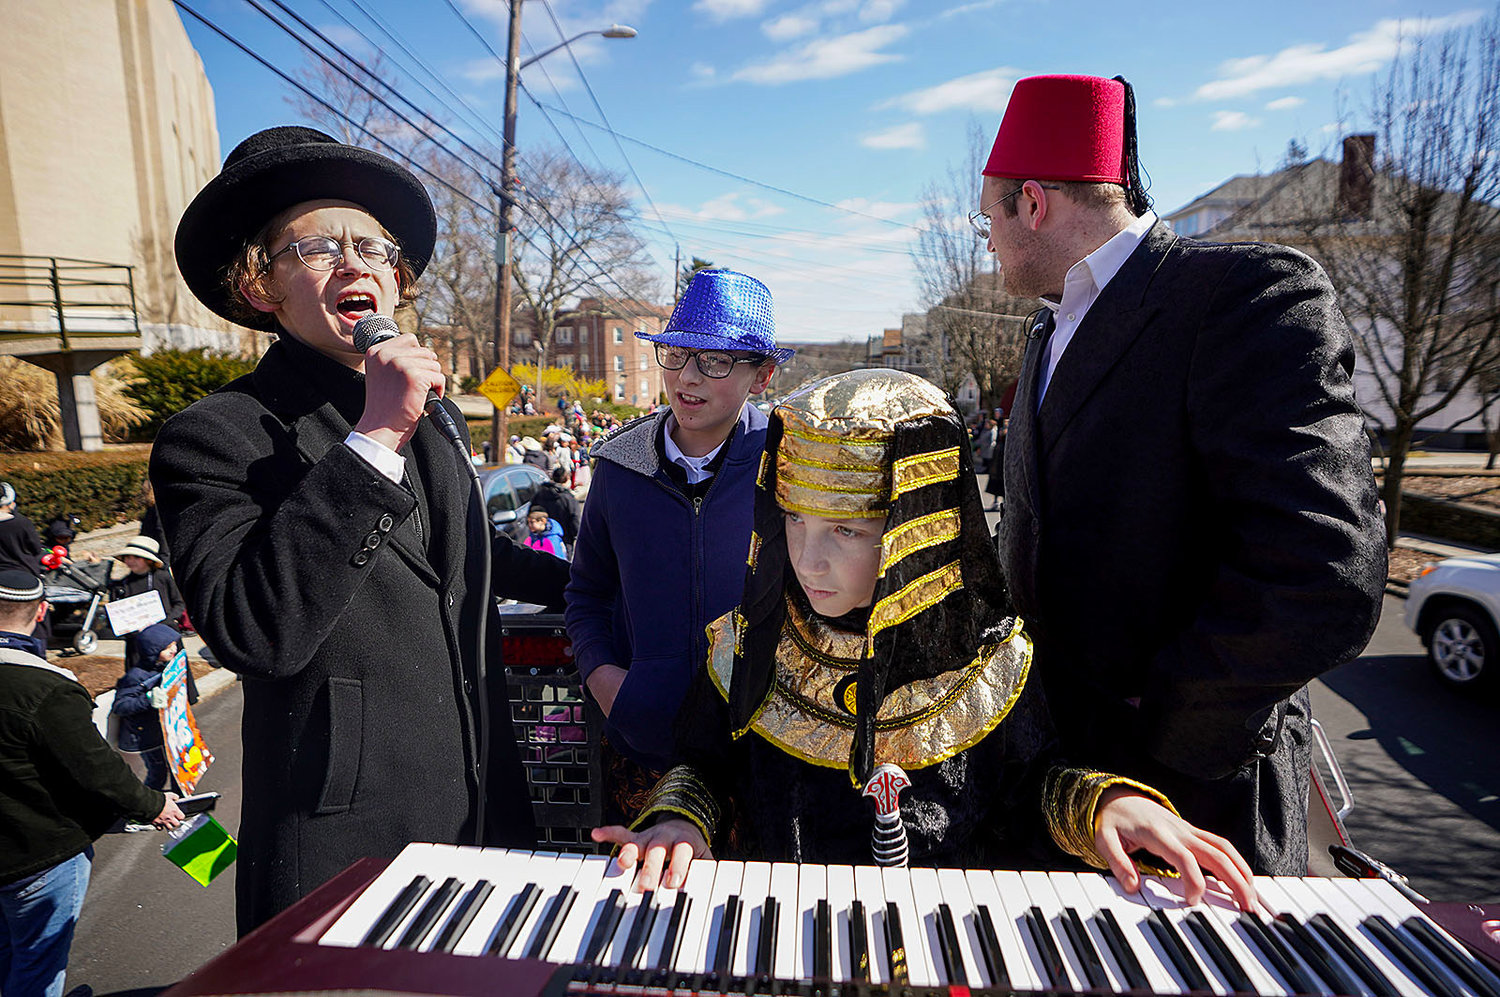 Akiva Yudkowsky, left, sings while his brother plays a keyboard on the back of a truck as the parade makes a turn onto Sessions Street.